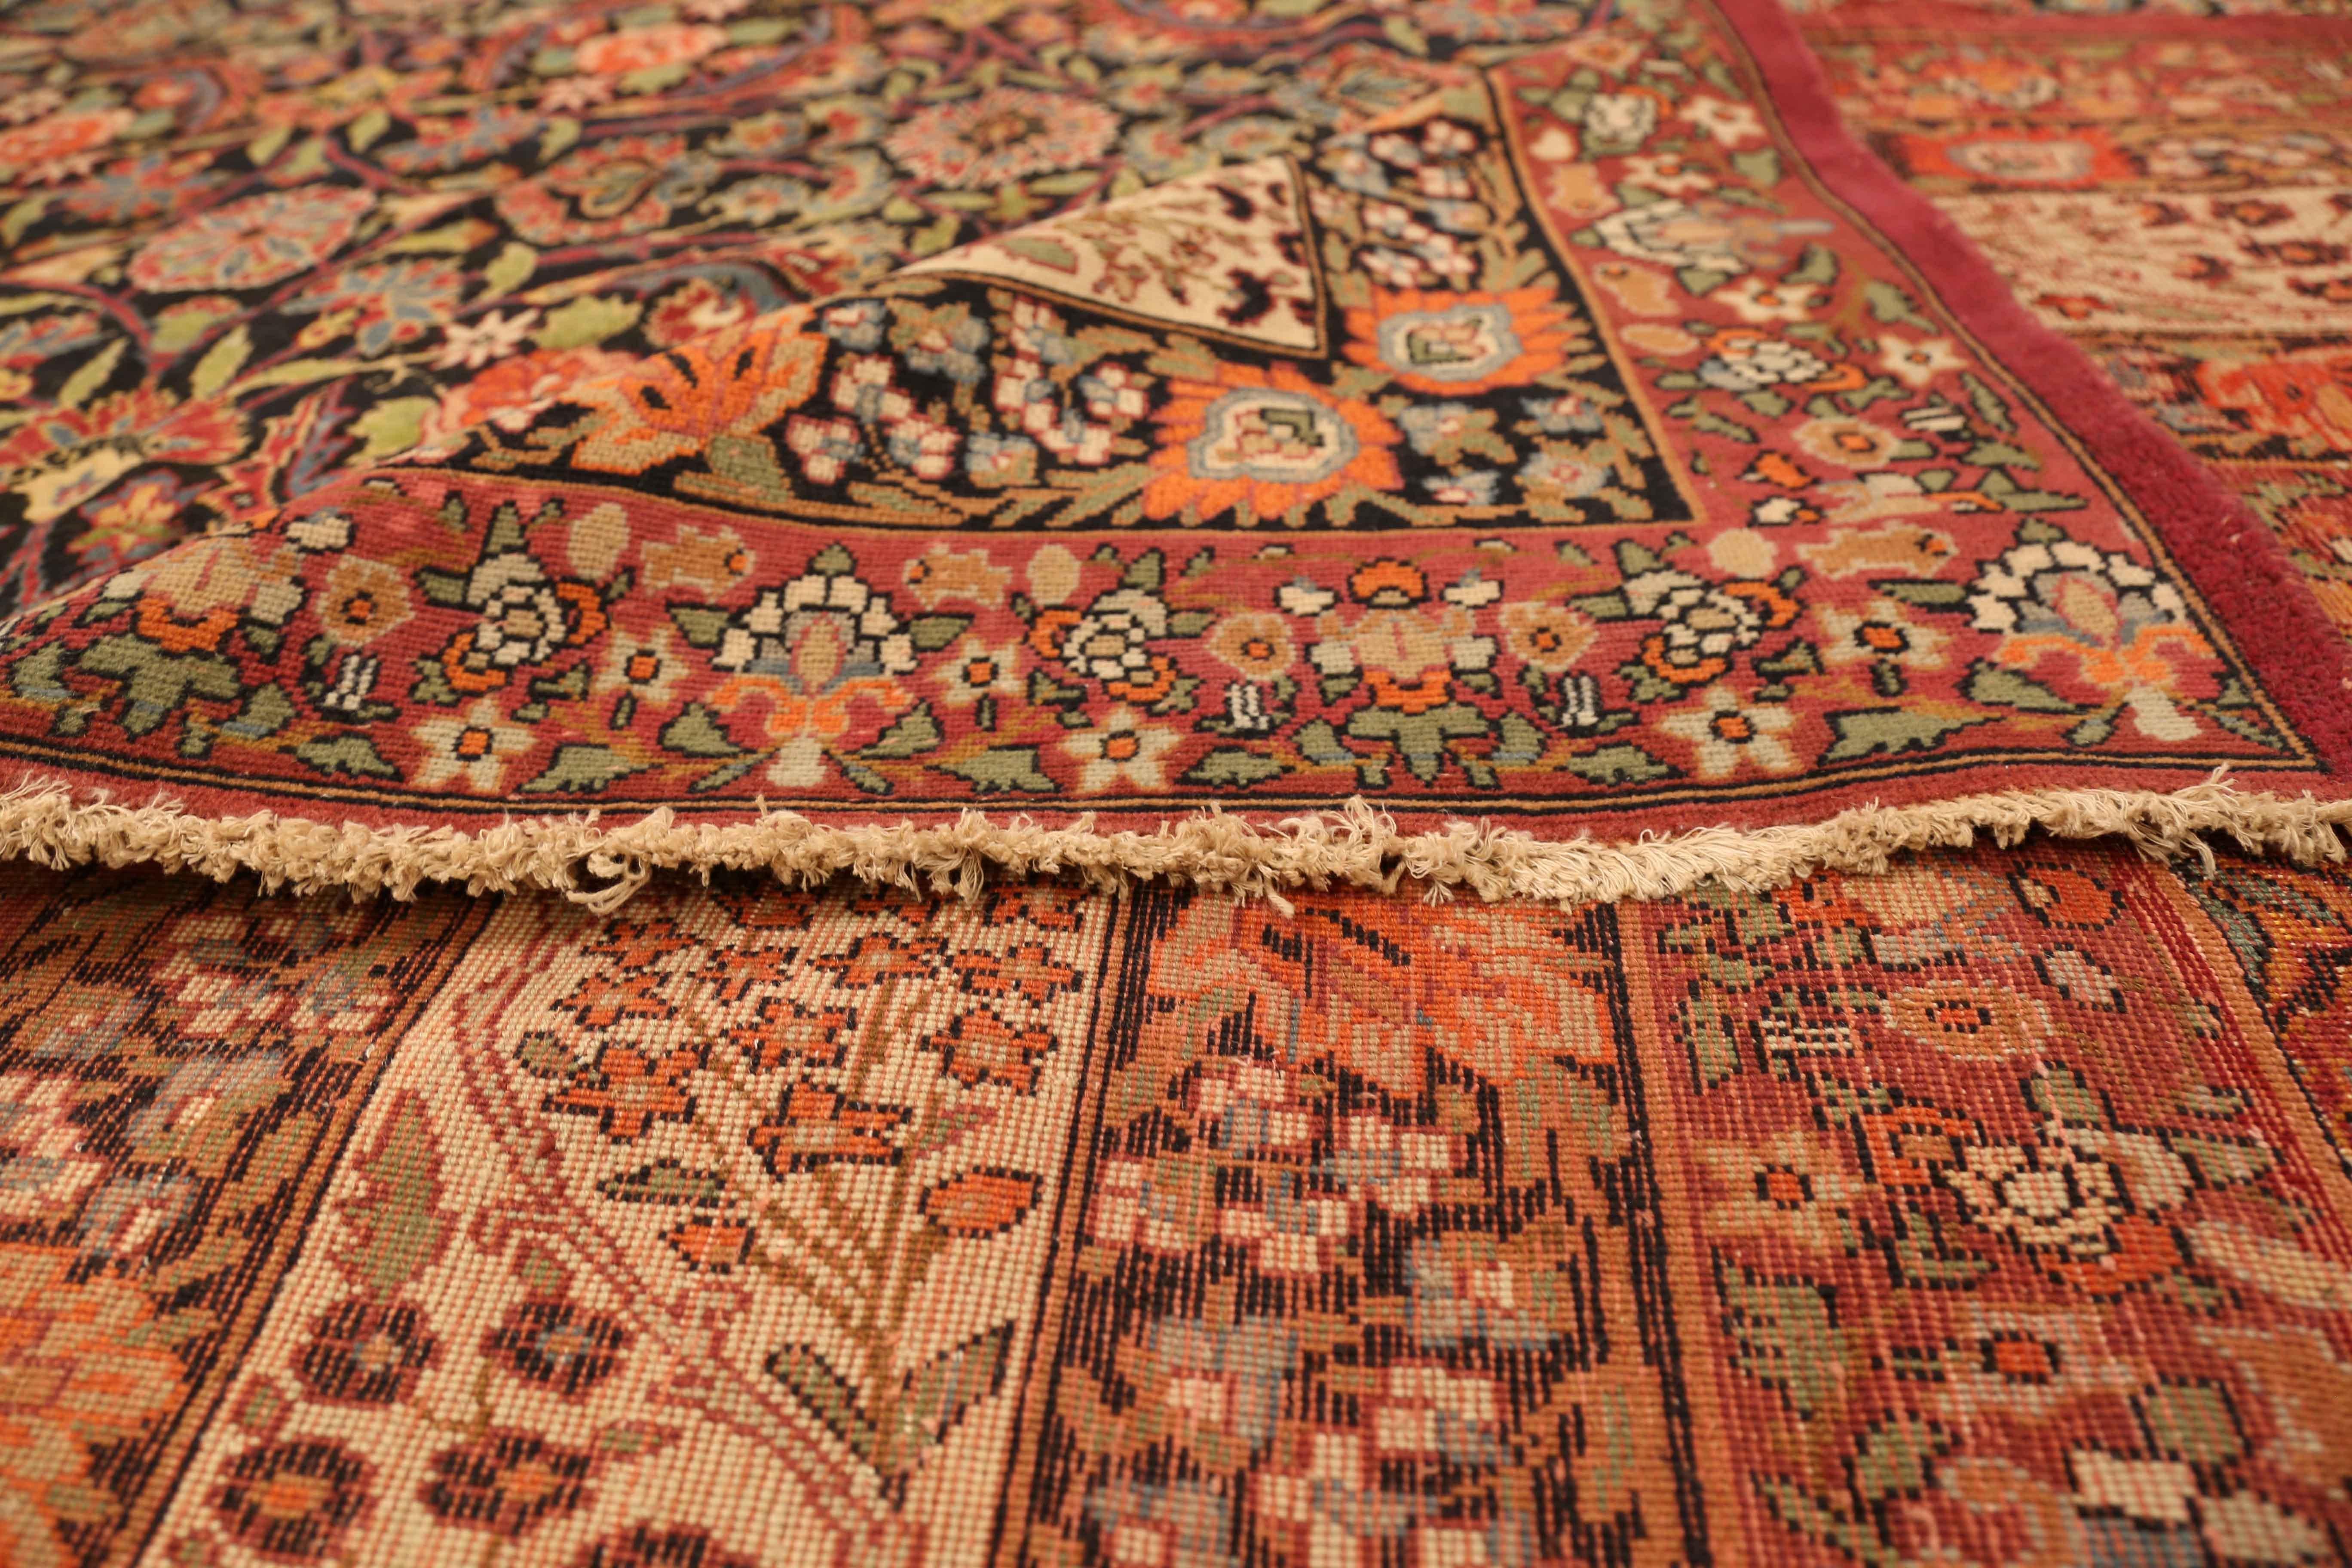 Antique Persian rug made in the 1890s by master weavers of the Kerman region. It was handwoven from the finest wool and rich organic dyes locally sourced and produced. It features intricately woven flower patterns in green, red and blue over a black